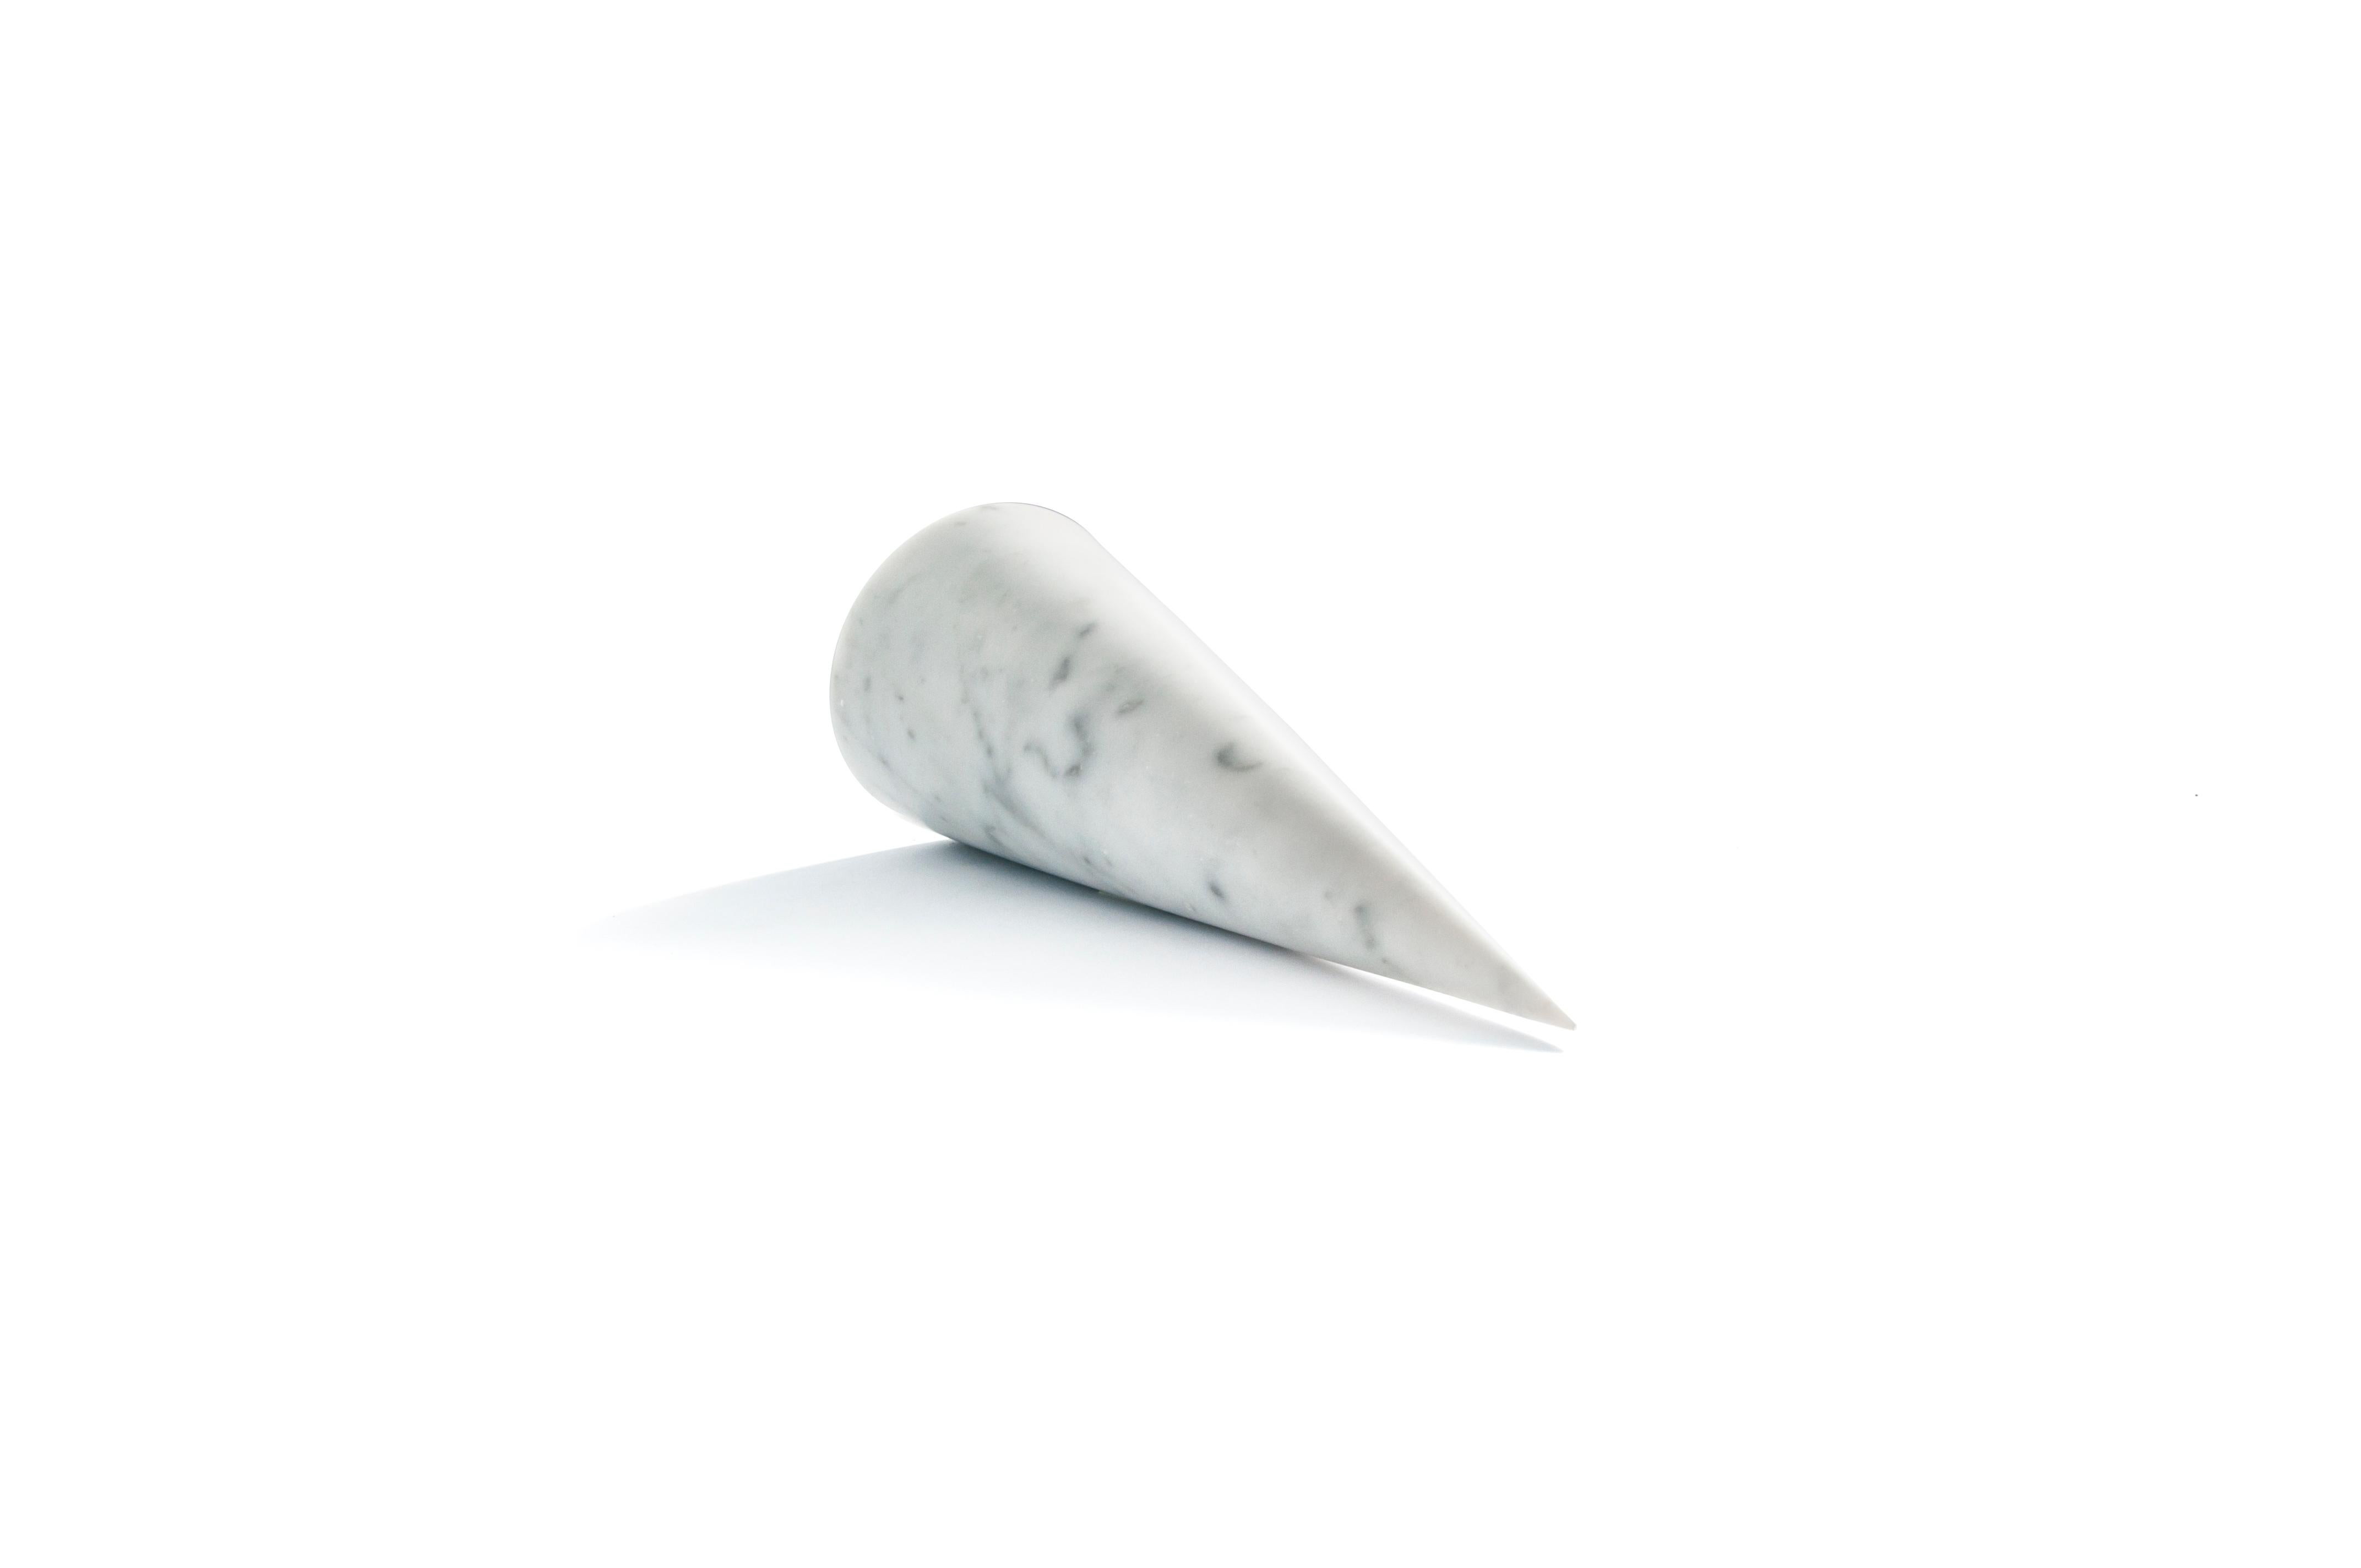 Hand-Crafted Handmade Big Decorative Paperweight Cone in Satin White Carrara Marble For Sale